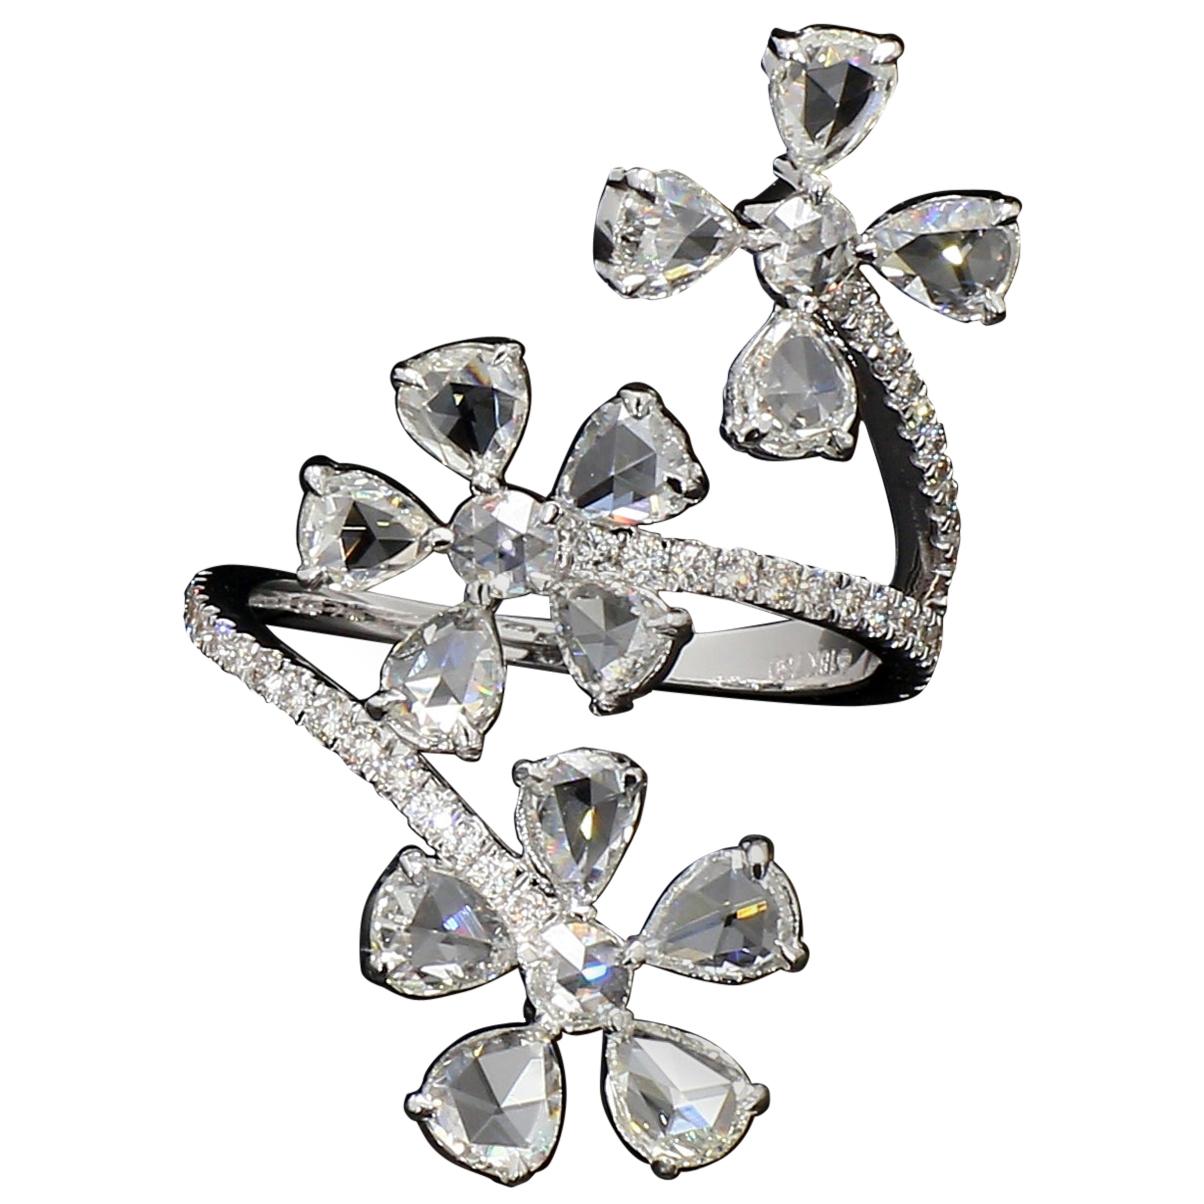 PANIM Trio Floral Ring with Diamond Rosecut in 18 Karat White Gold For Sale